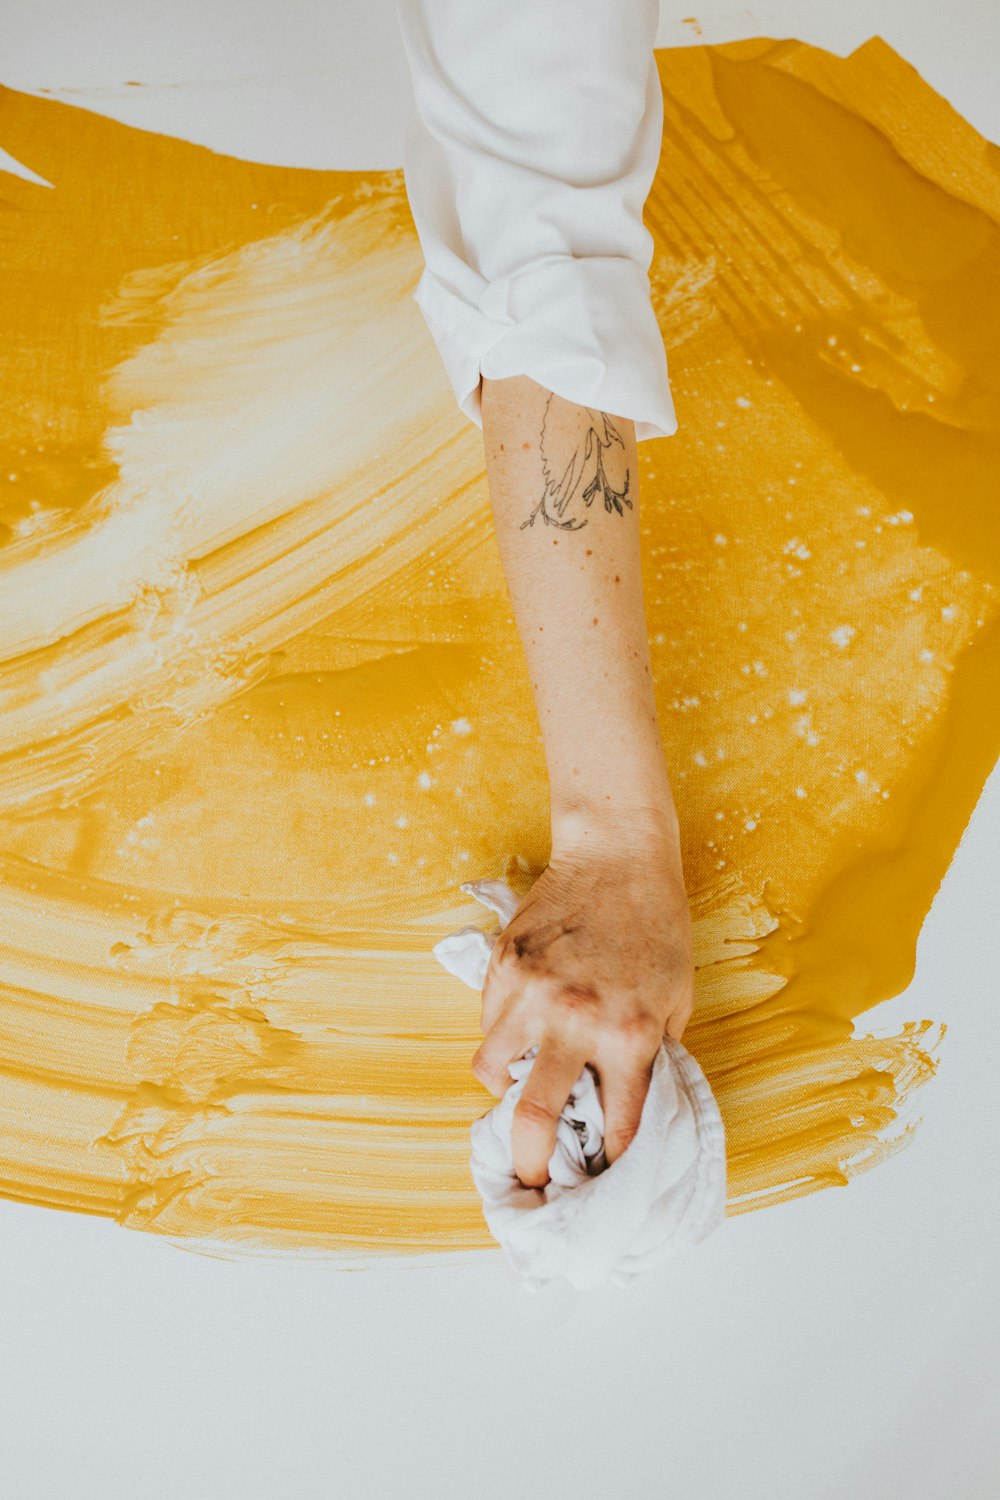 a person with a tattoo on their arm painting a yellow piece of art